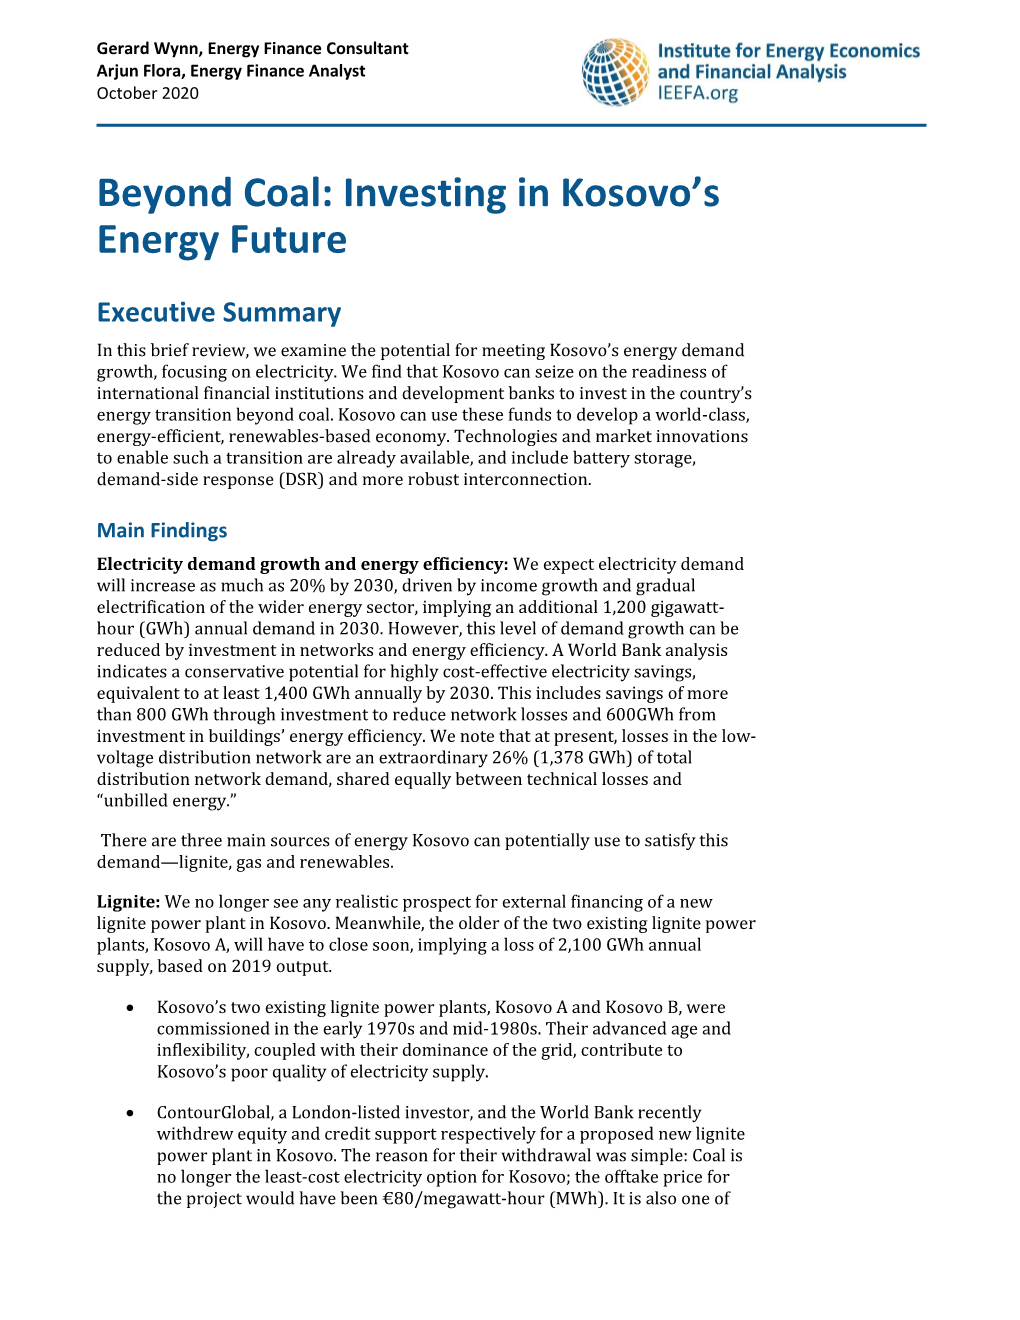 Beyond Coal: Investing in Kosovo's Energy Future